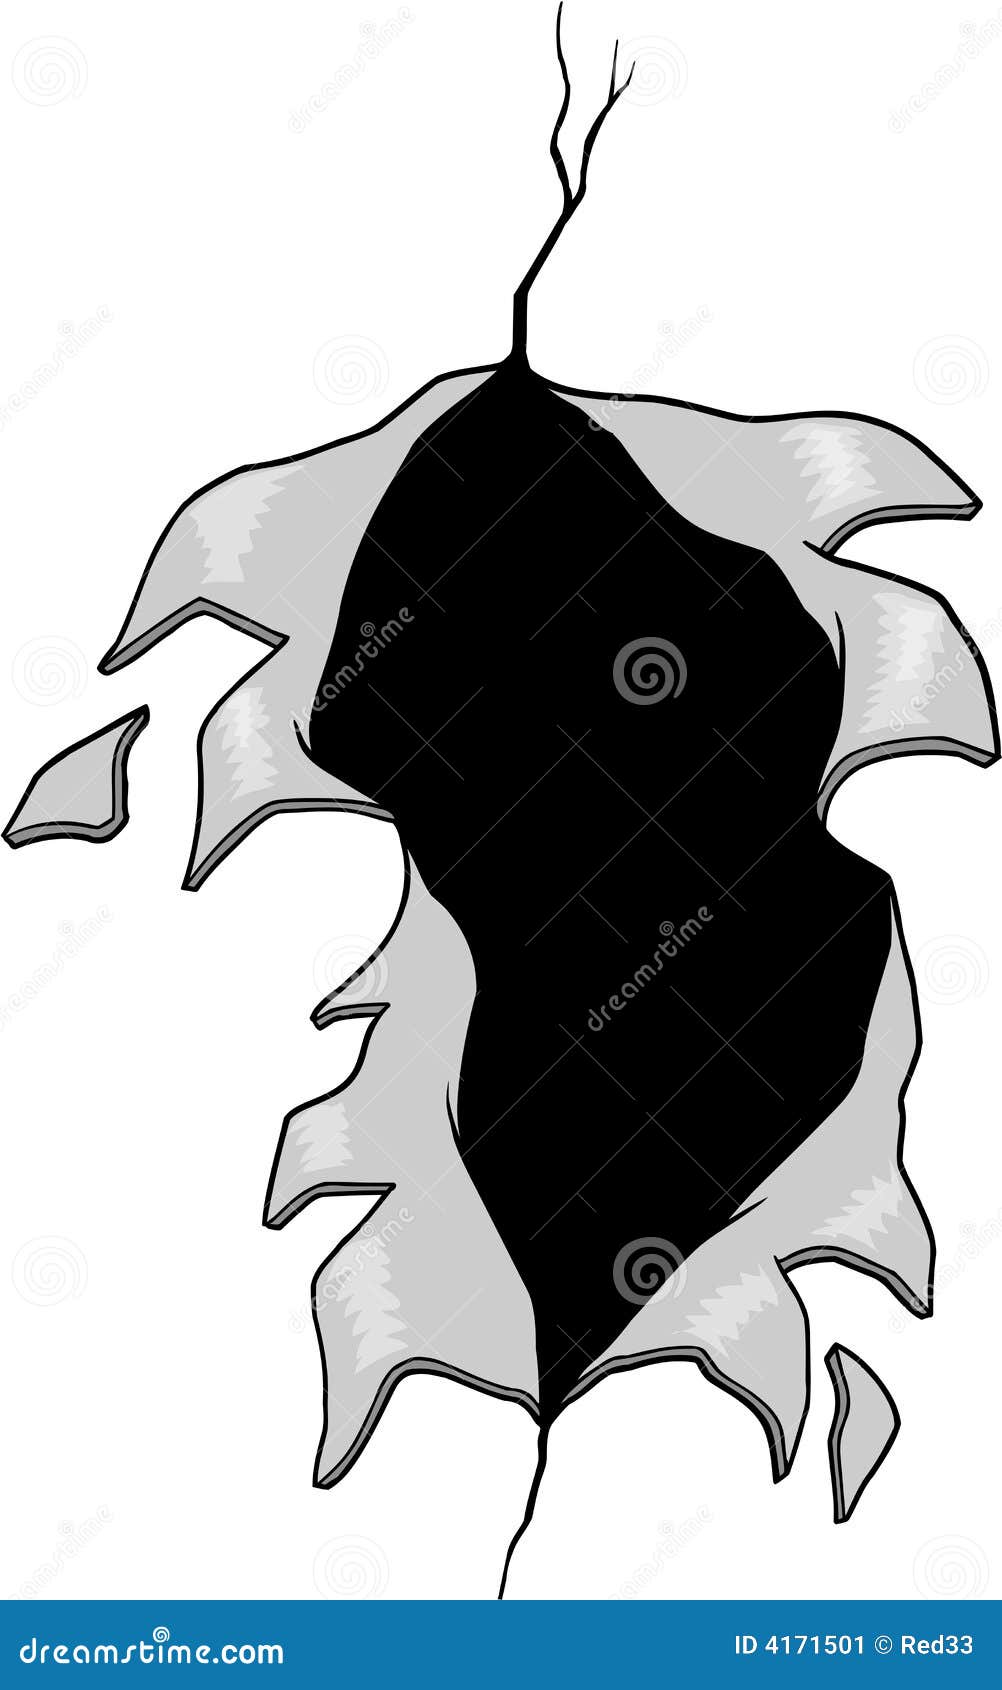 Ripped Hole Vector Stock Image - Image: 4171501